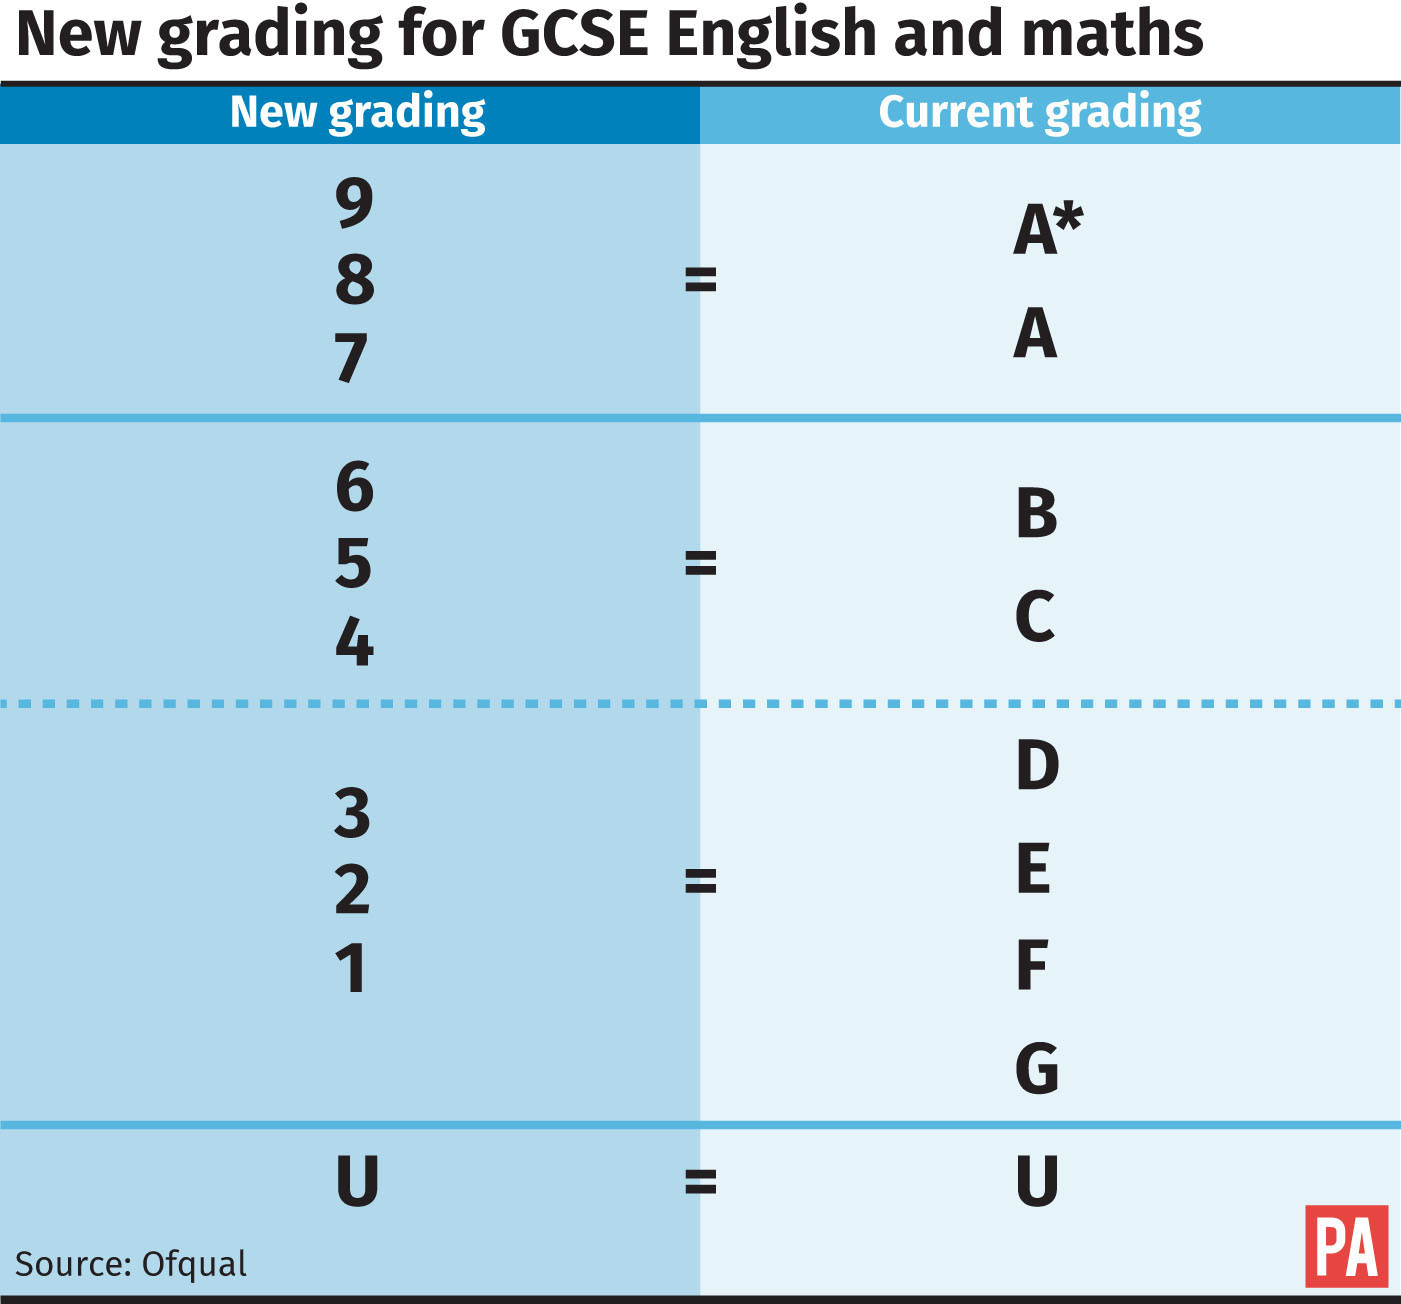 5 better ways GCSEs could be graded Jersey Evening Post